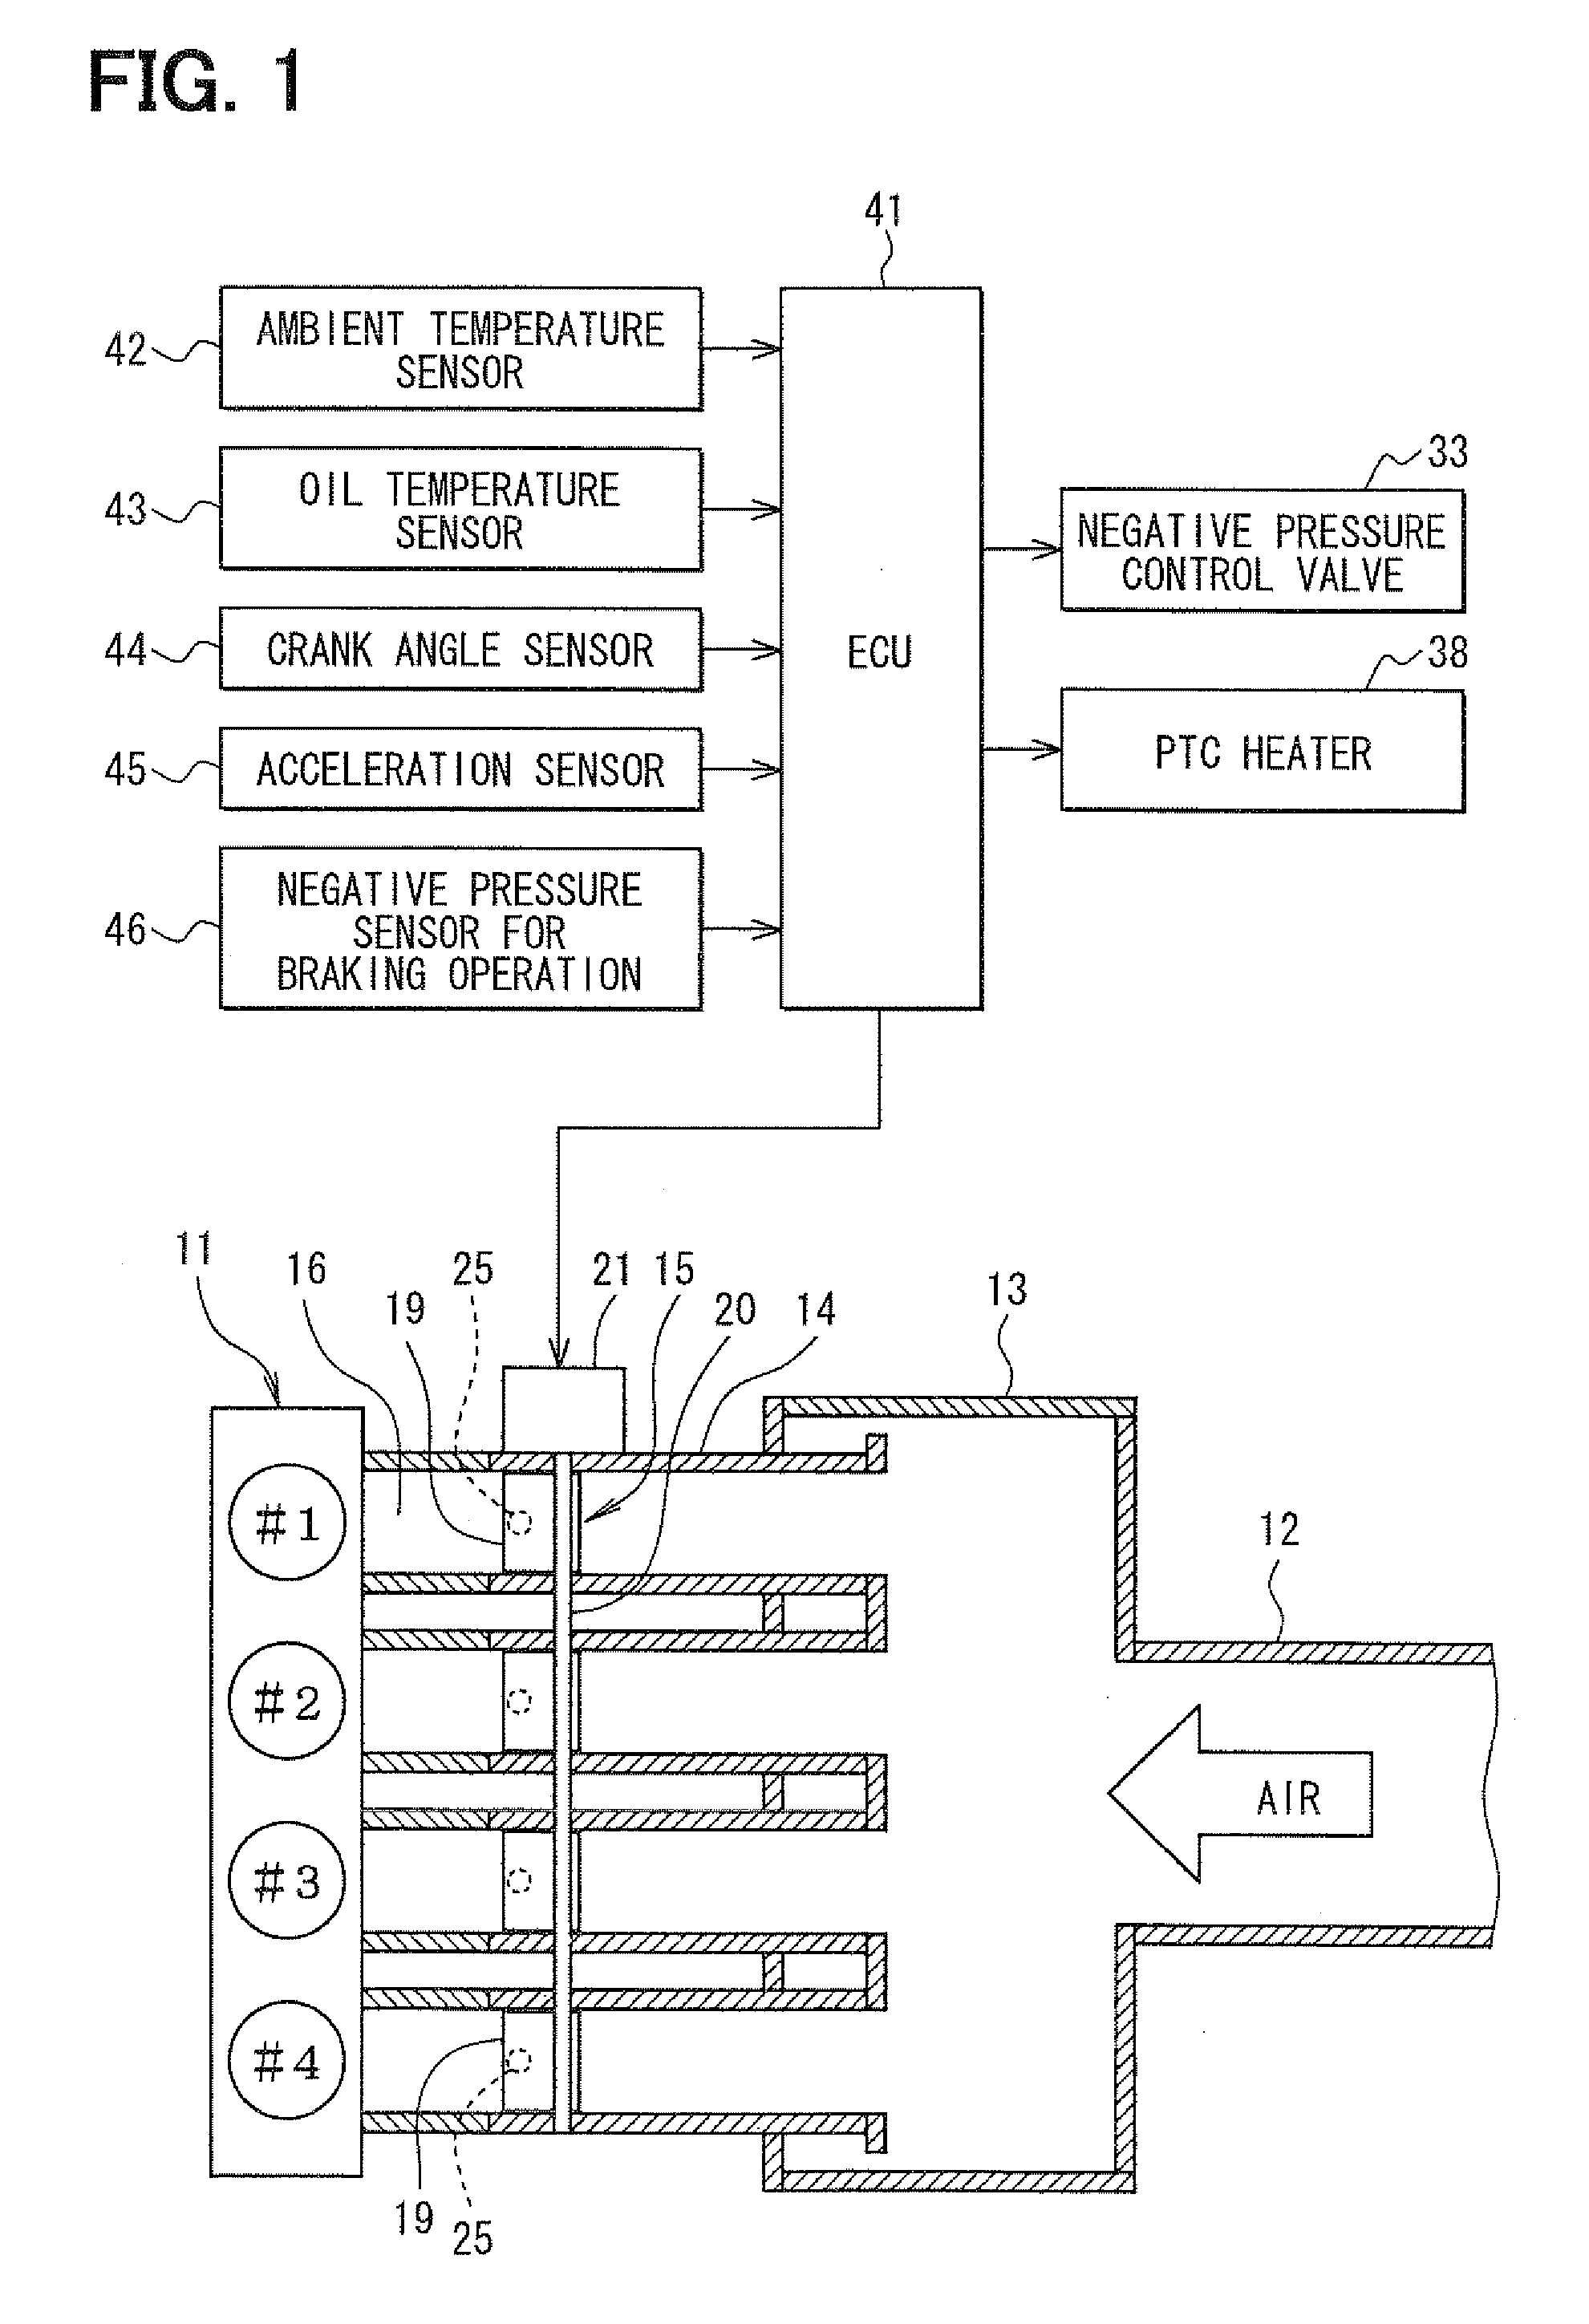 Negative pressure control apparatus for vehicle breaking operation